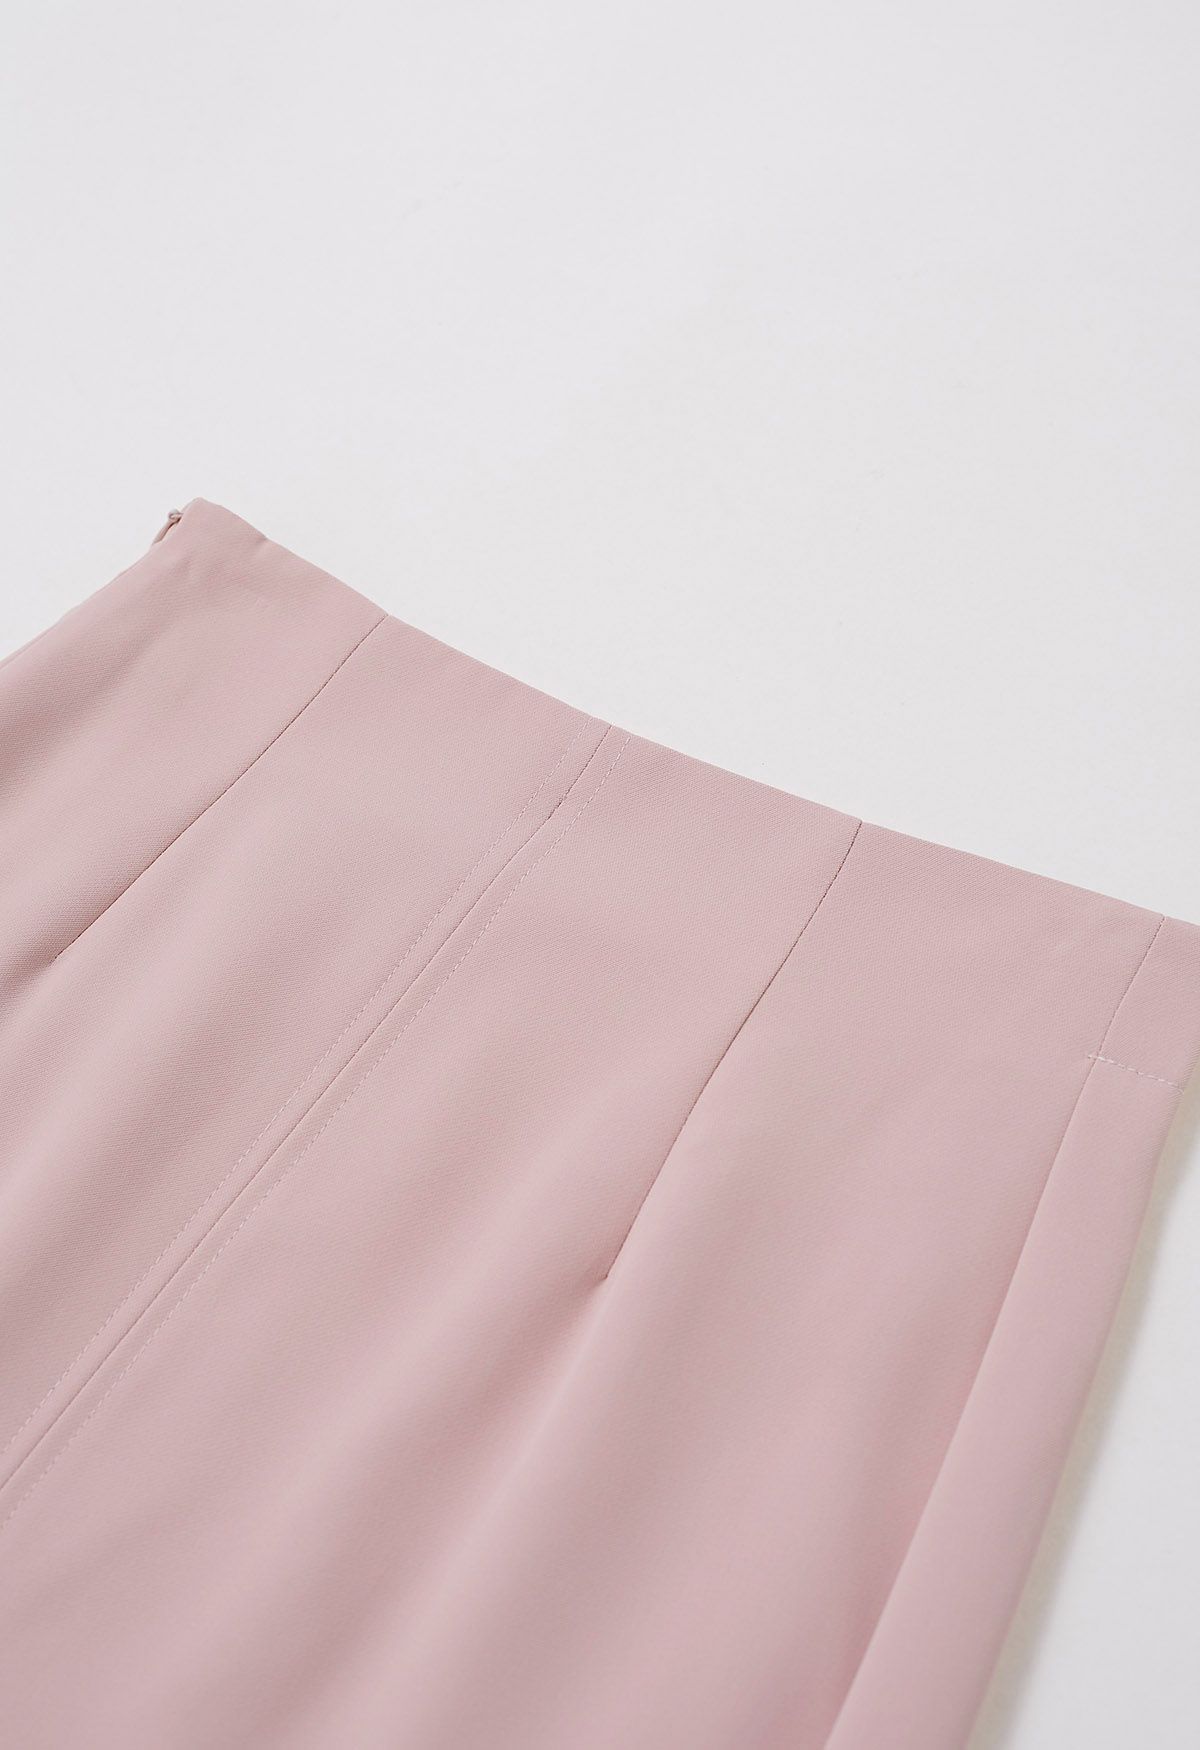 Solid Color Frilling Skirt in Pink